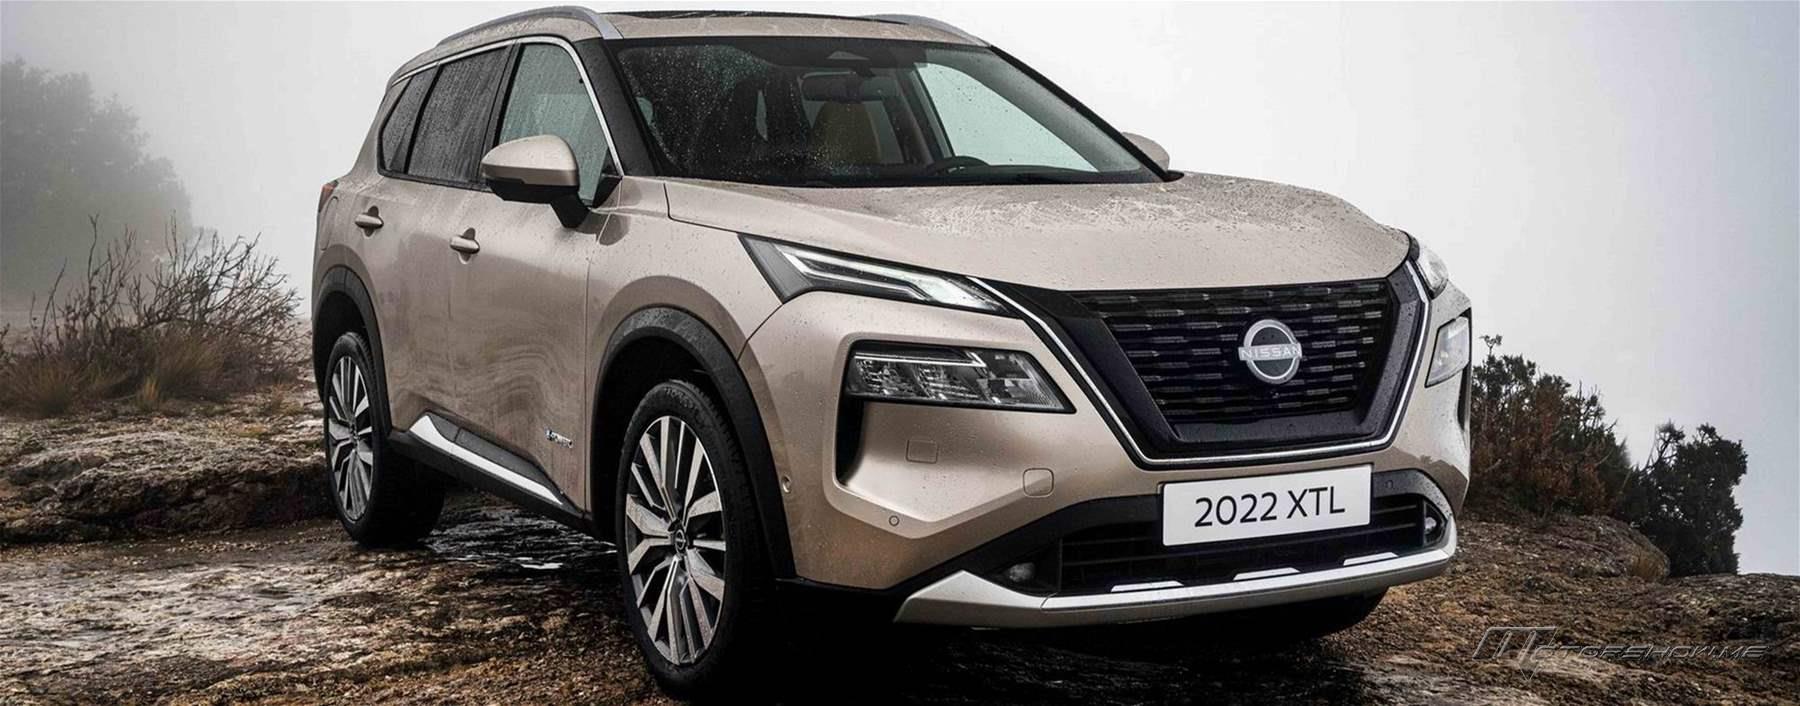 All-New Nissan X-Trail Breaks Cover